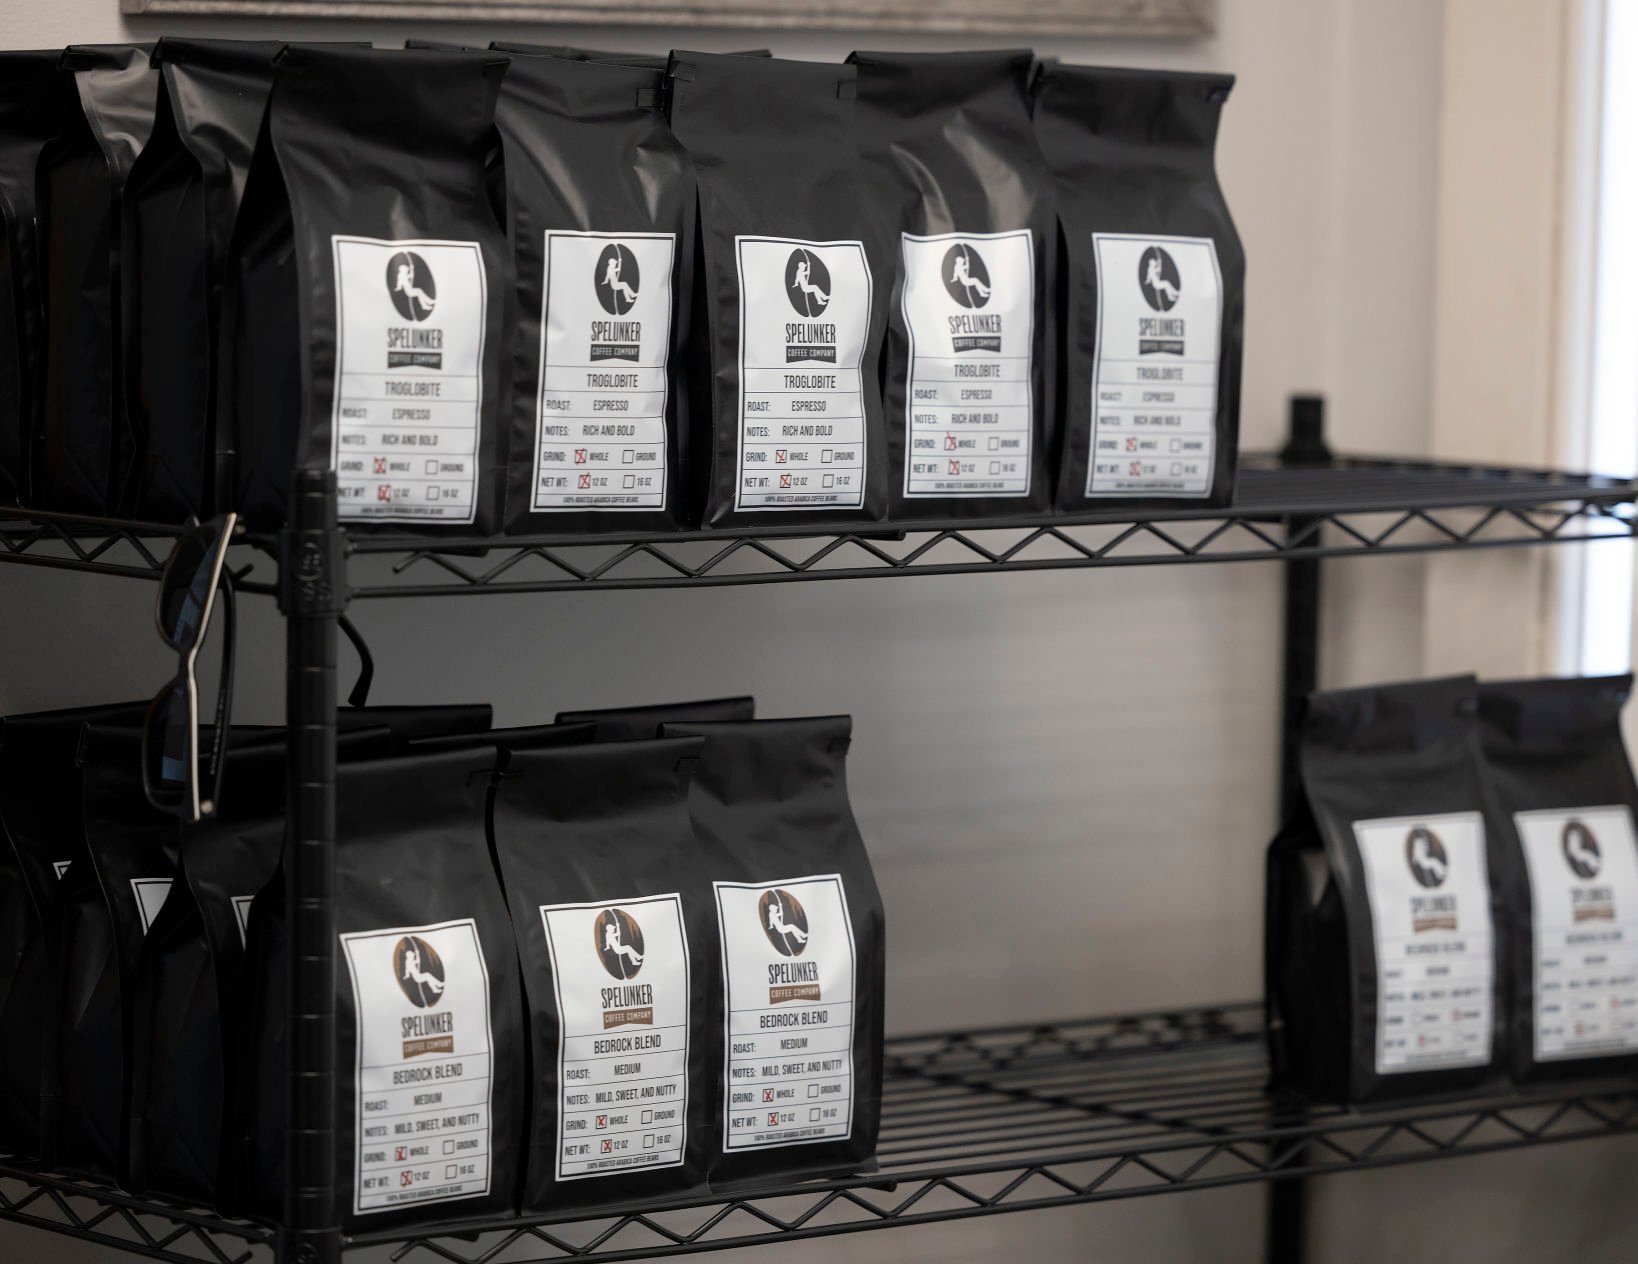 Ground and bagged coffee at Spelunker Coffee Co. in Maquoketa, Iowa.    PHOTO CREDIT: Stephen Gassman